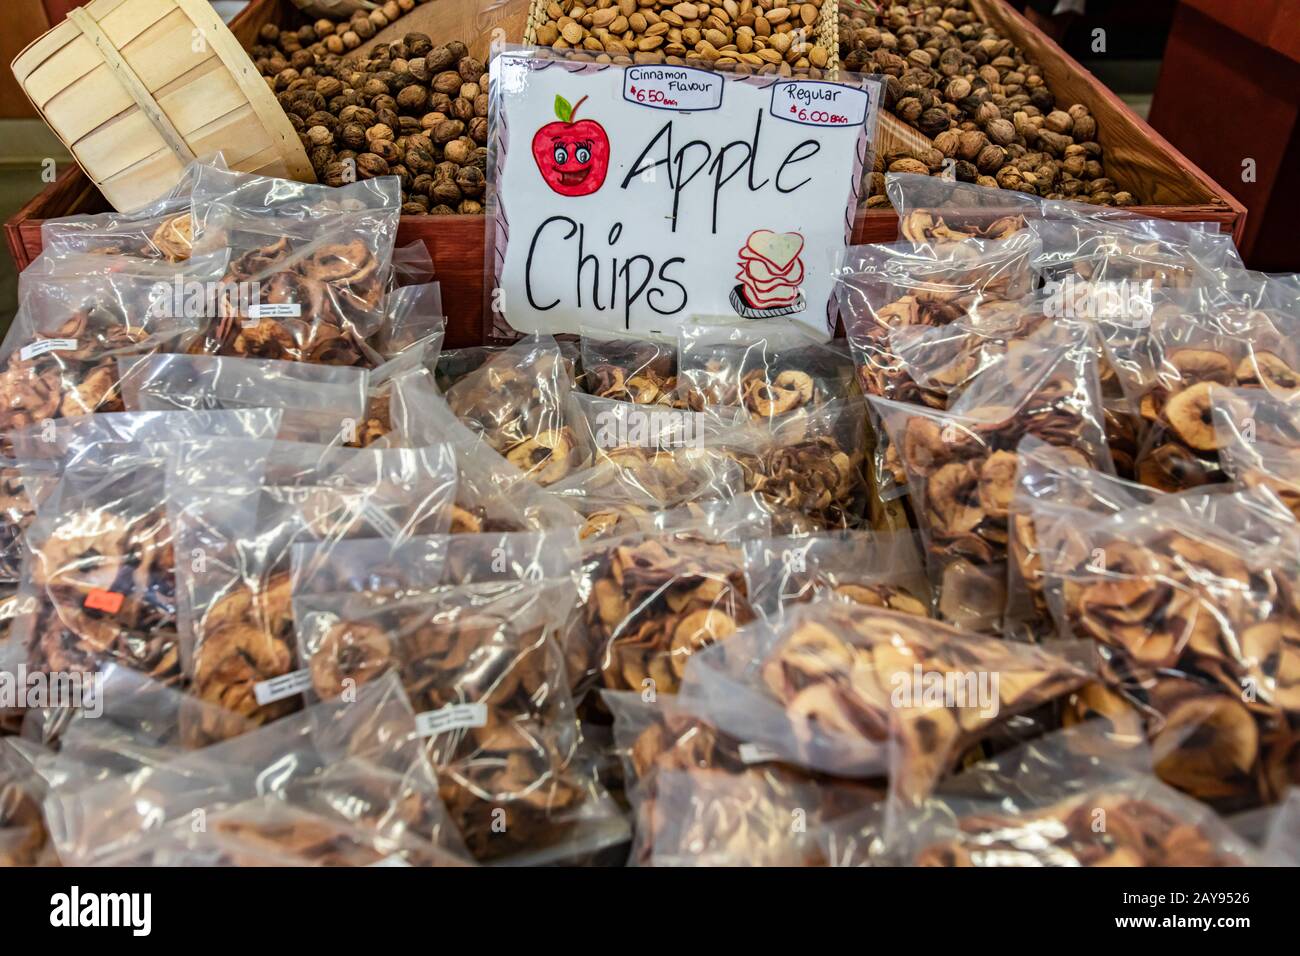 Pack of hand made apple chips, with or without cinnamon, at the local market. Chips packed in plastic bags. Hand written price sign. Organic food. Stock Photo